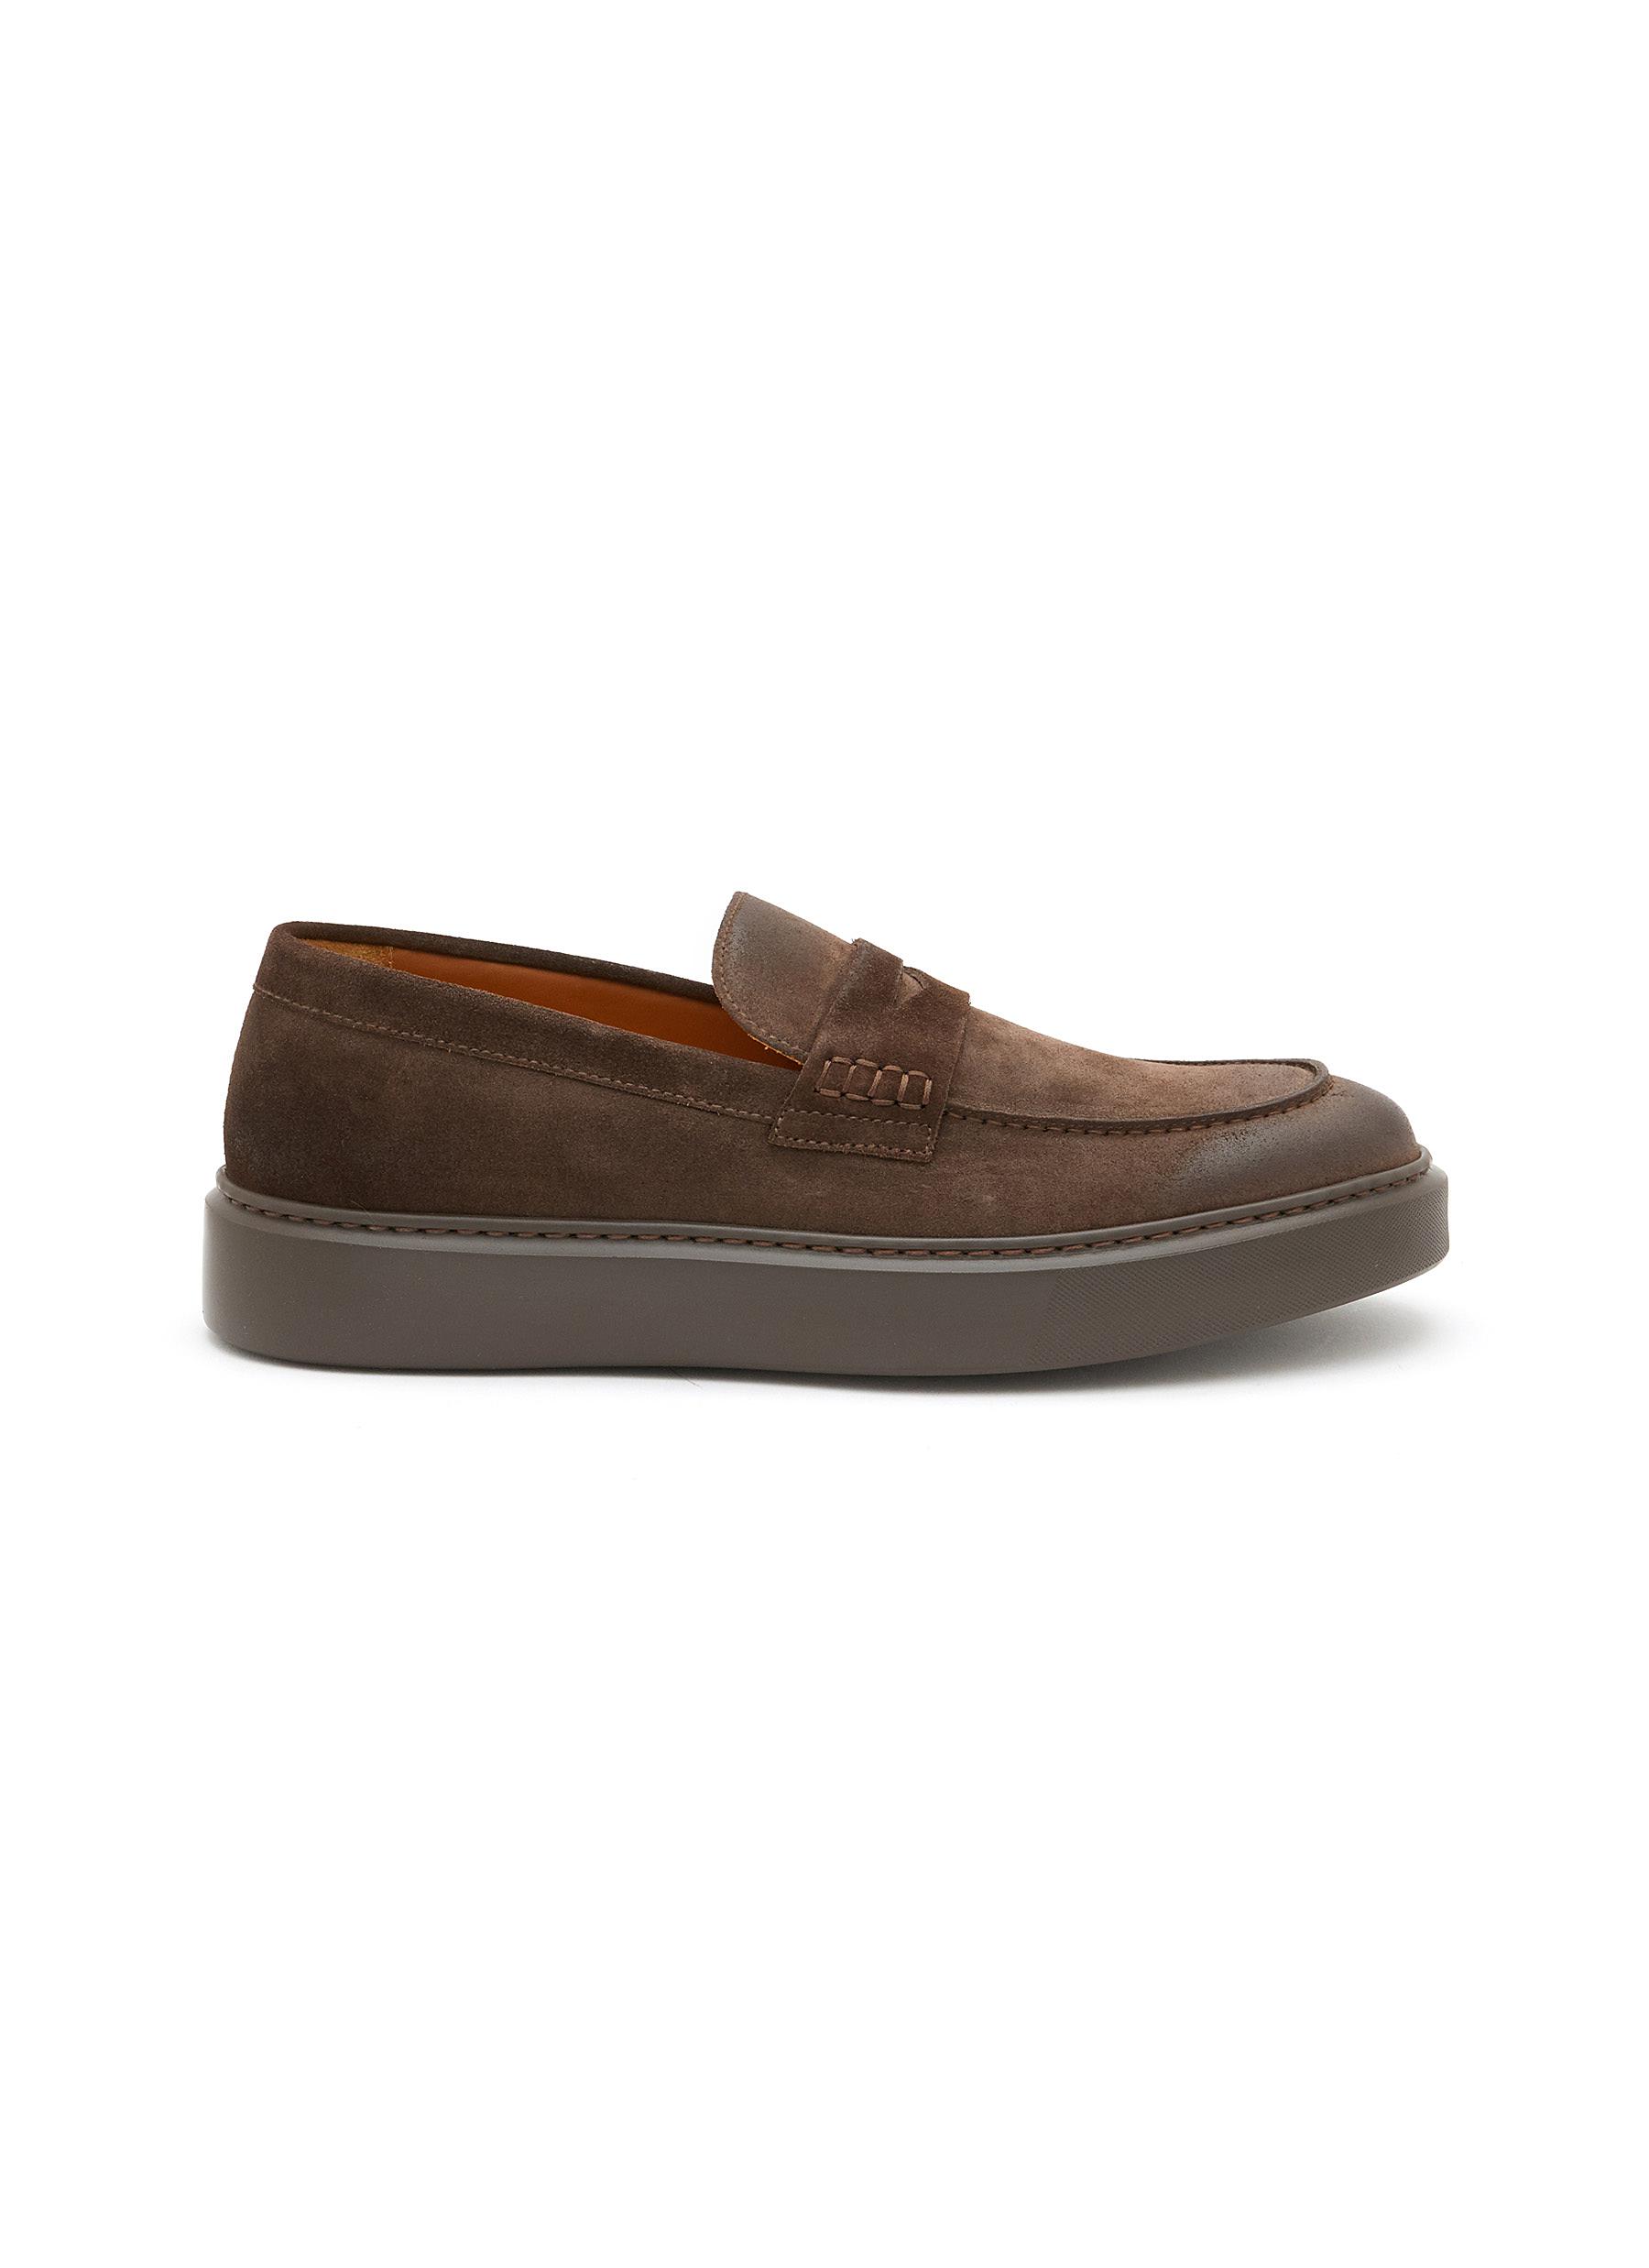 Suede Leather Penny Loafers